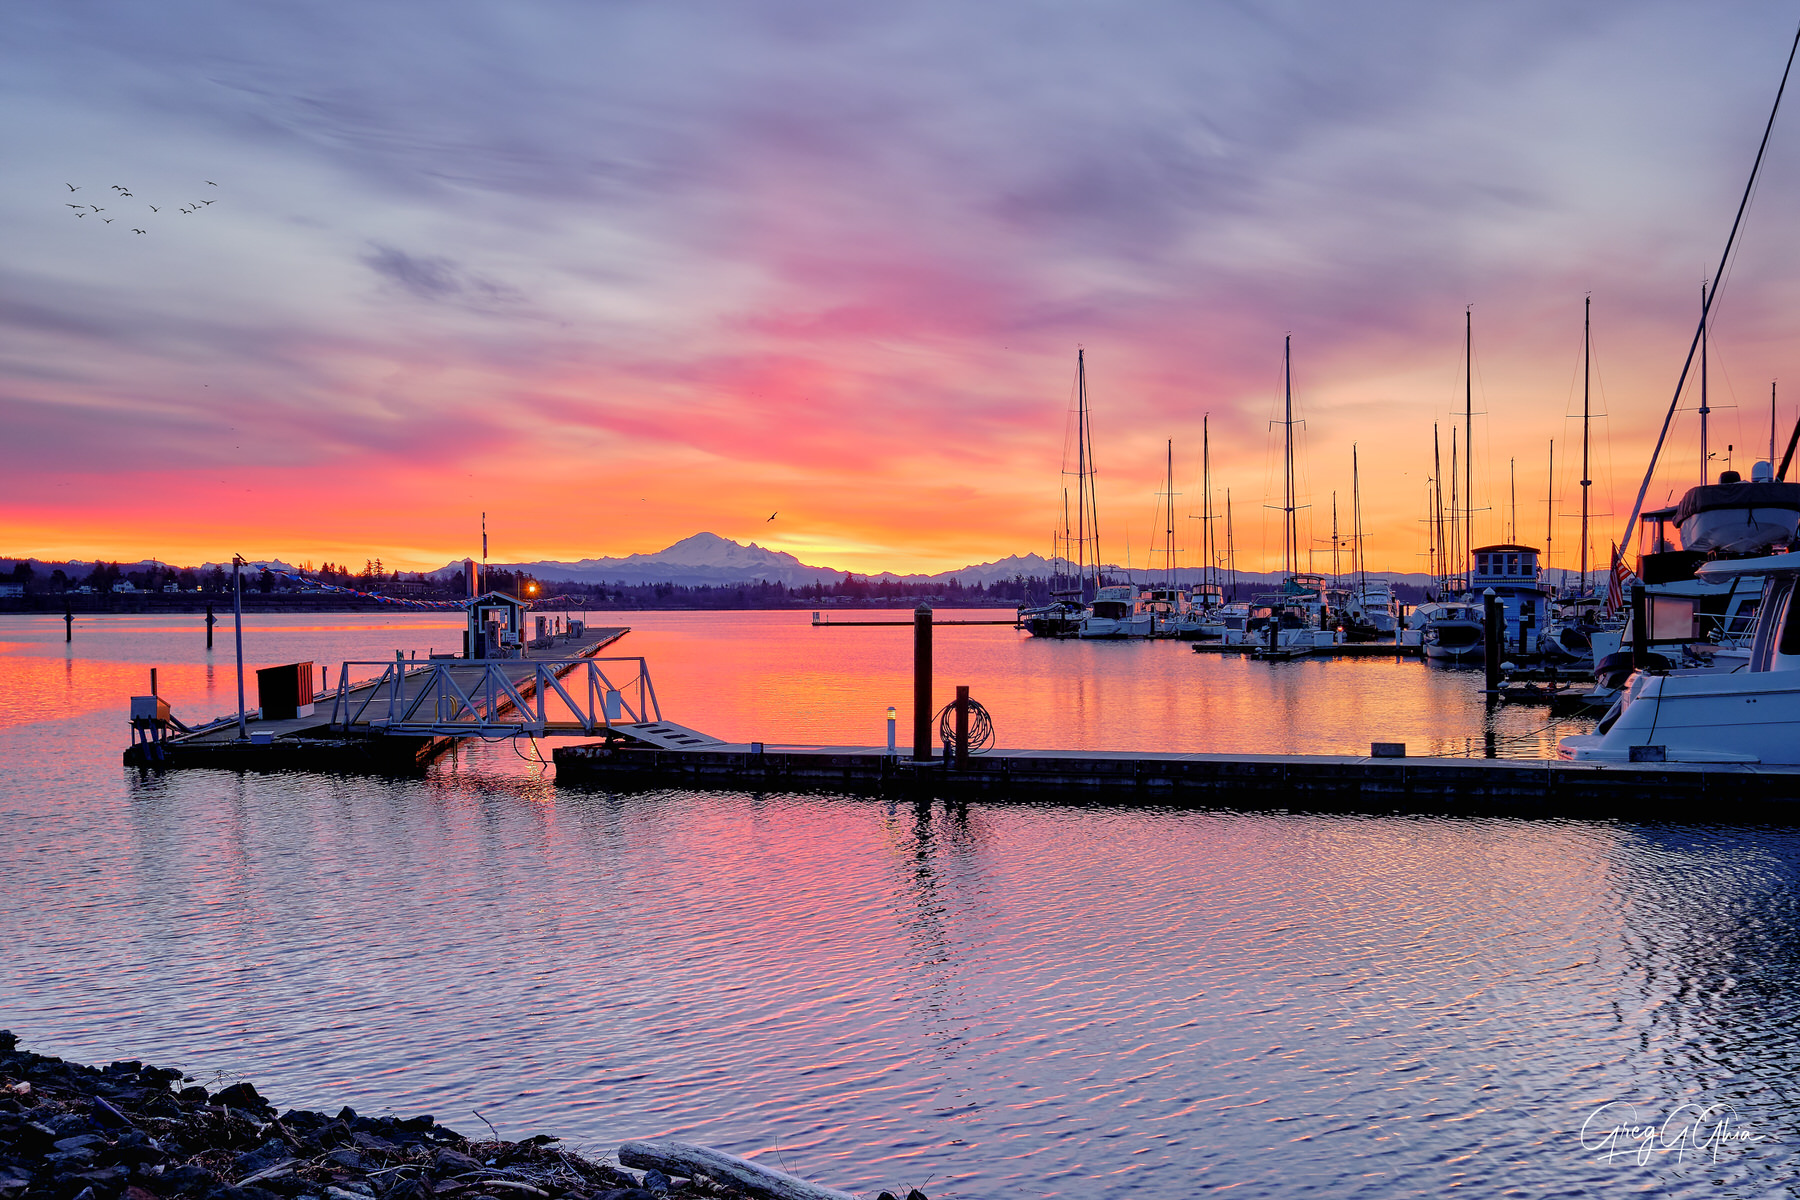 Sunrise at the marina where mountains are seen across the water as the sunrise casts pink and orange clouds across the sky that reflect on the water with boats.